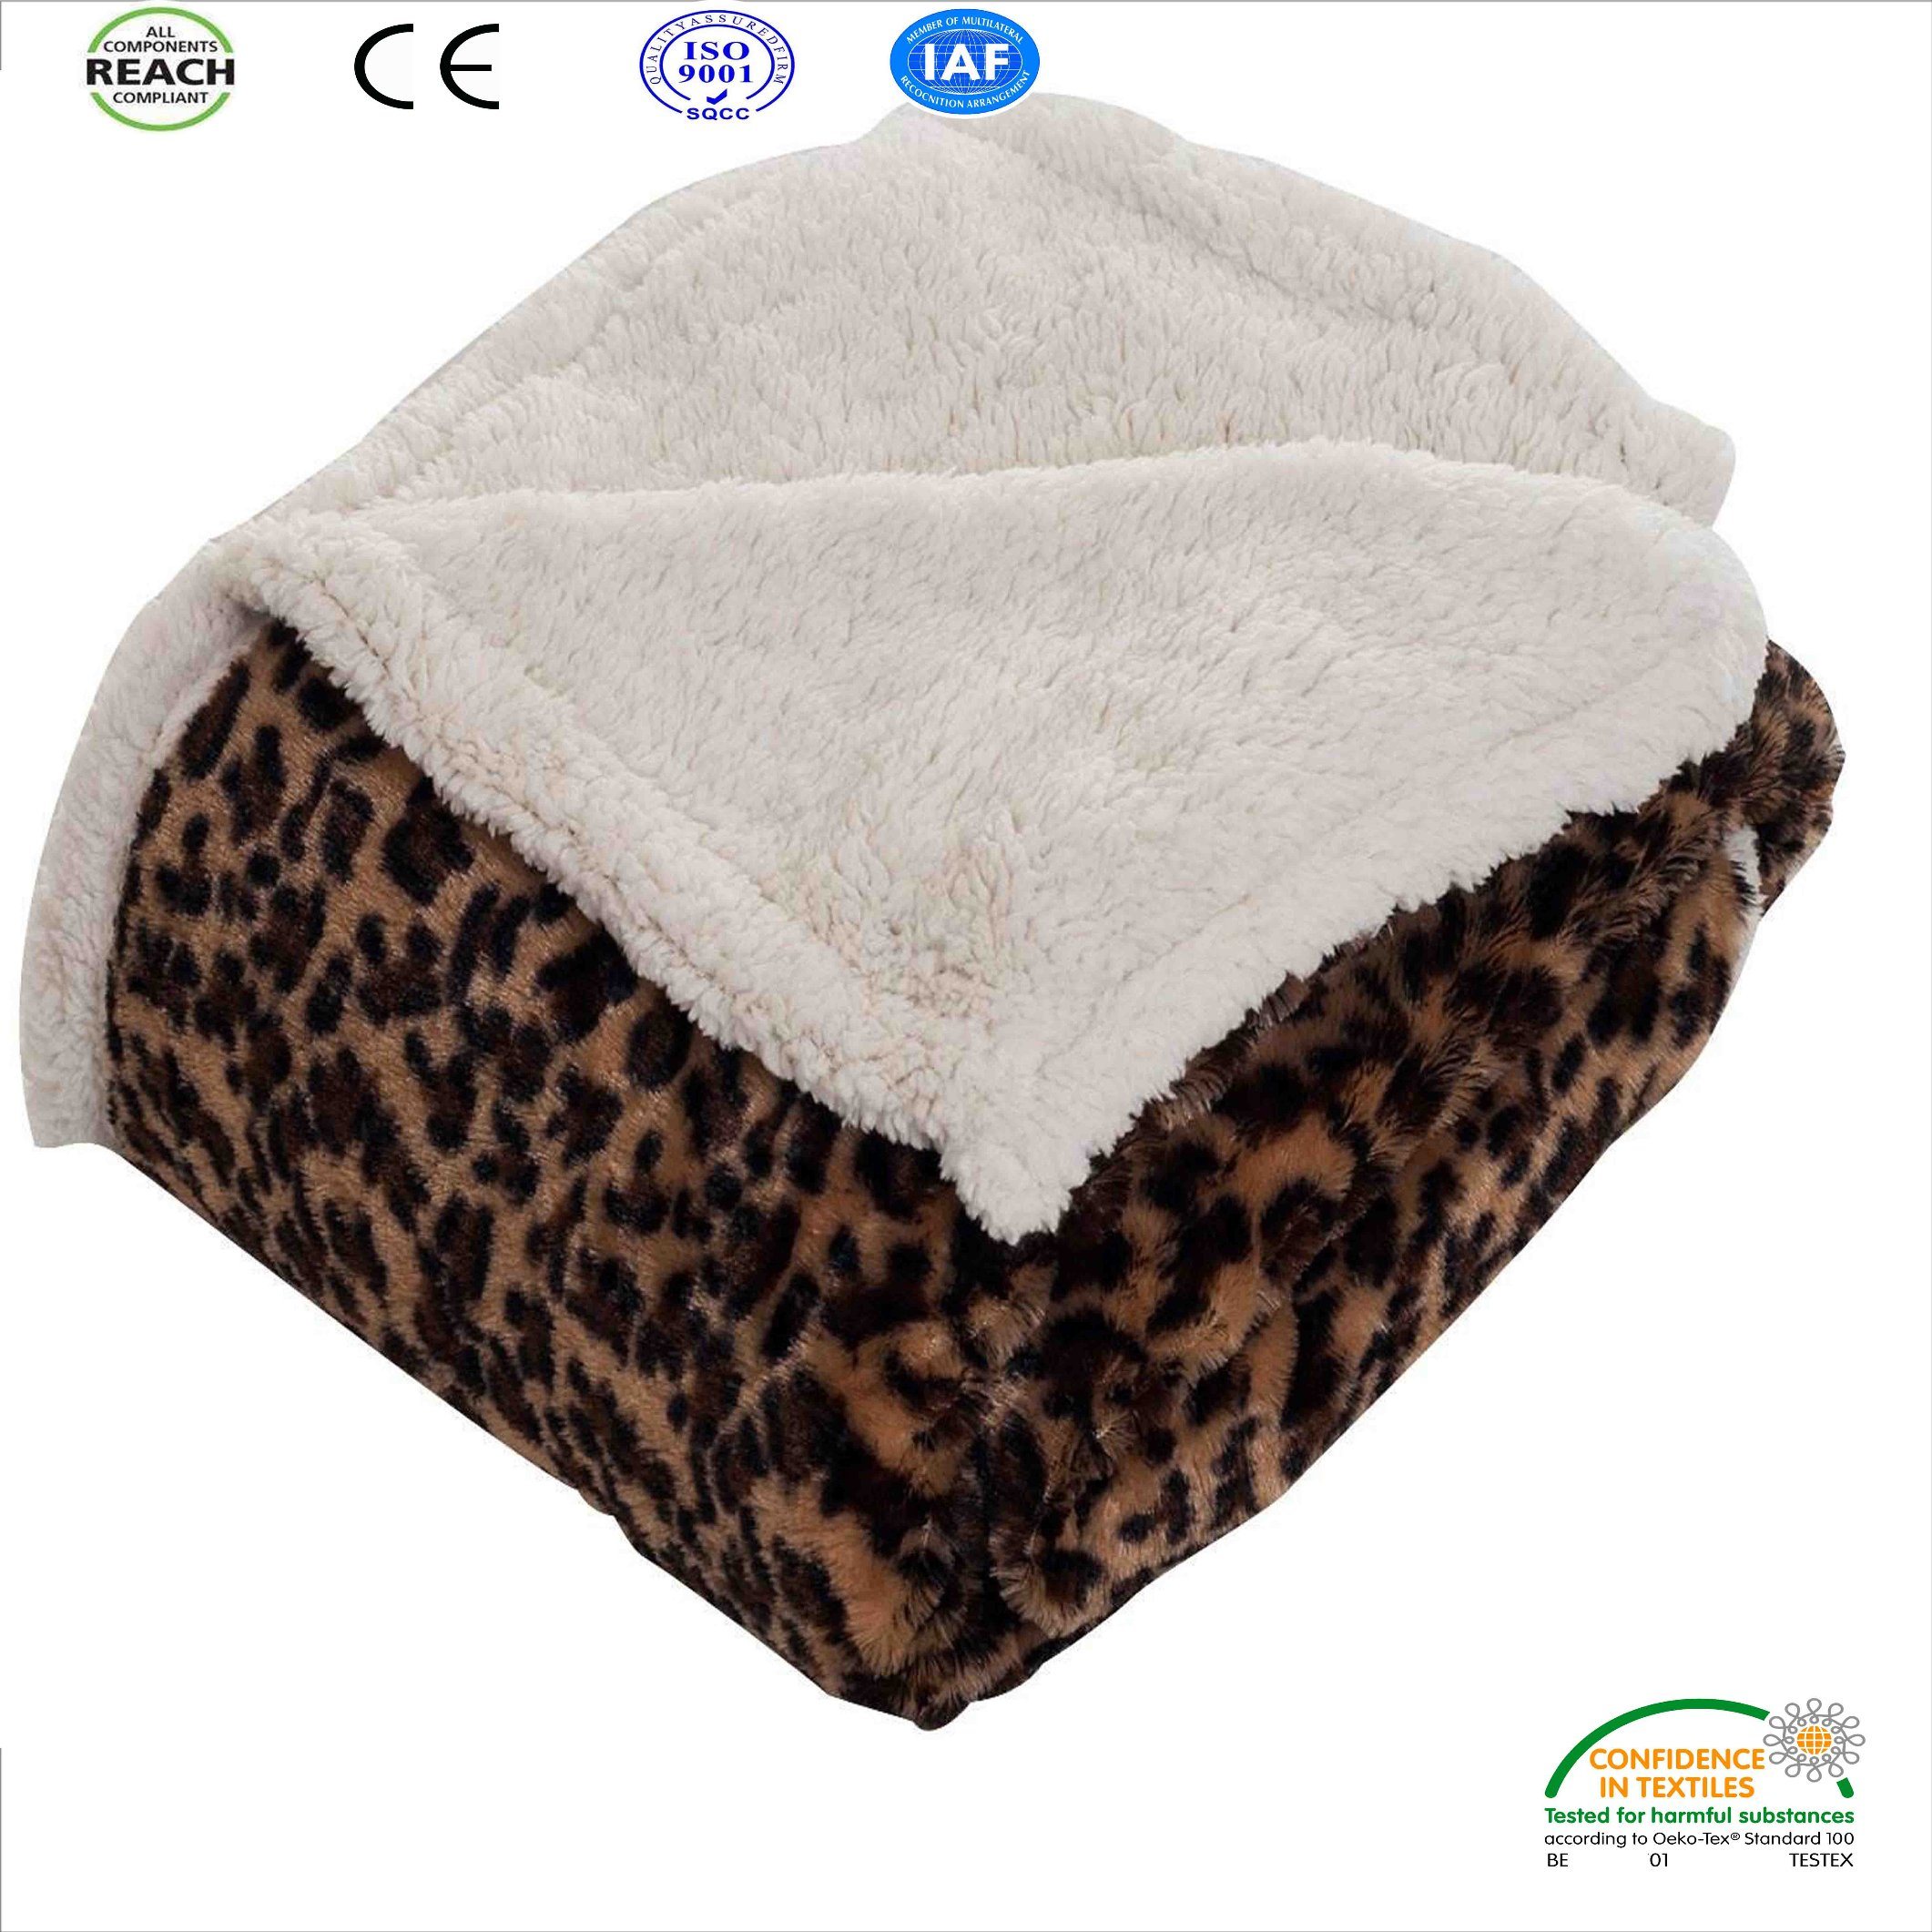 100% Thick Cotton Flannel Fabric Edredones/Cobijas Turco Wholesale Sherpa Blanket From China